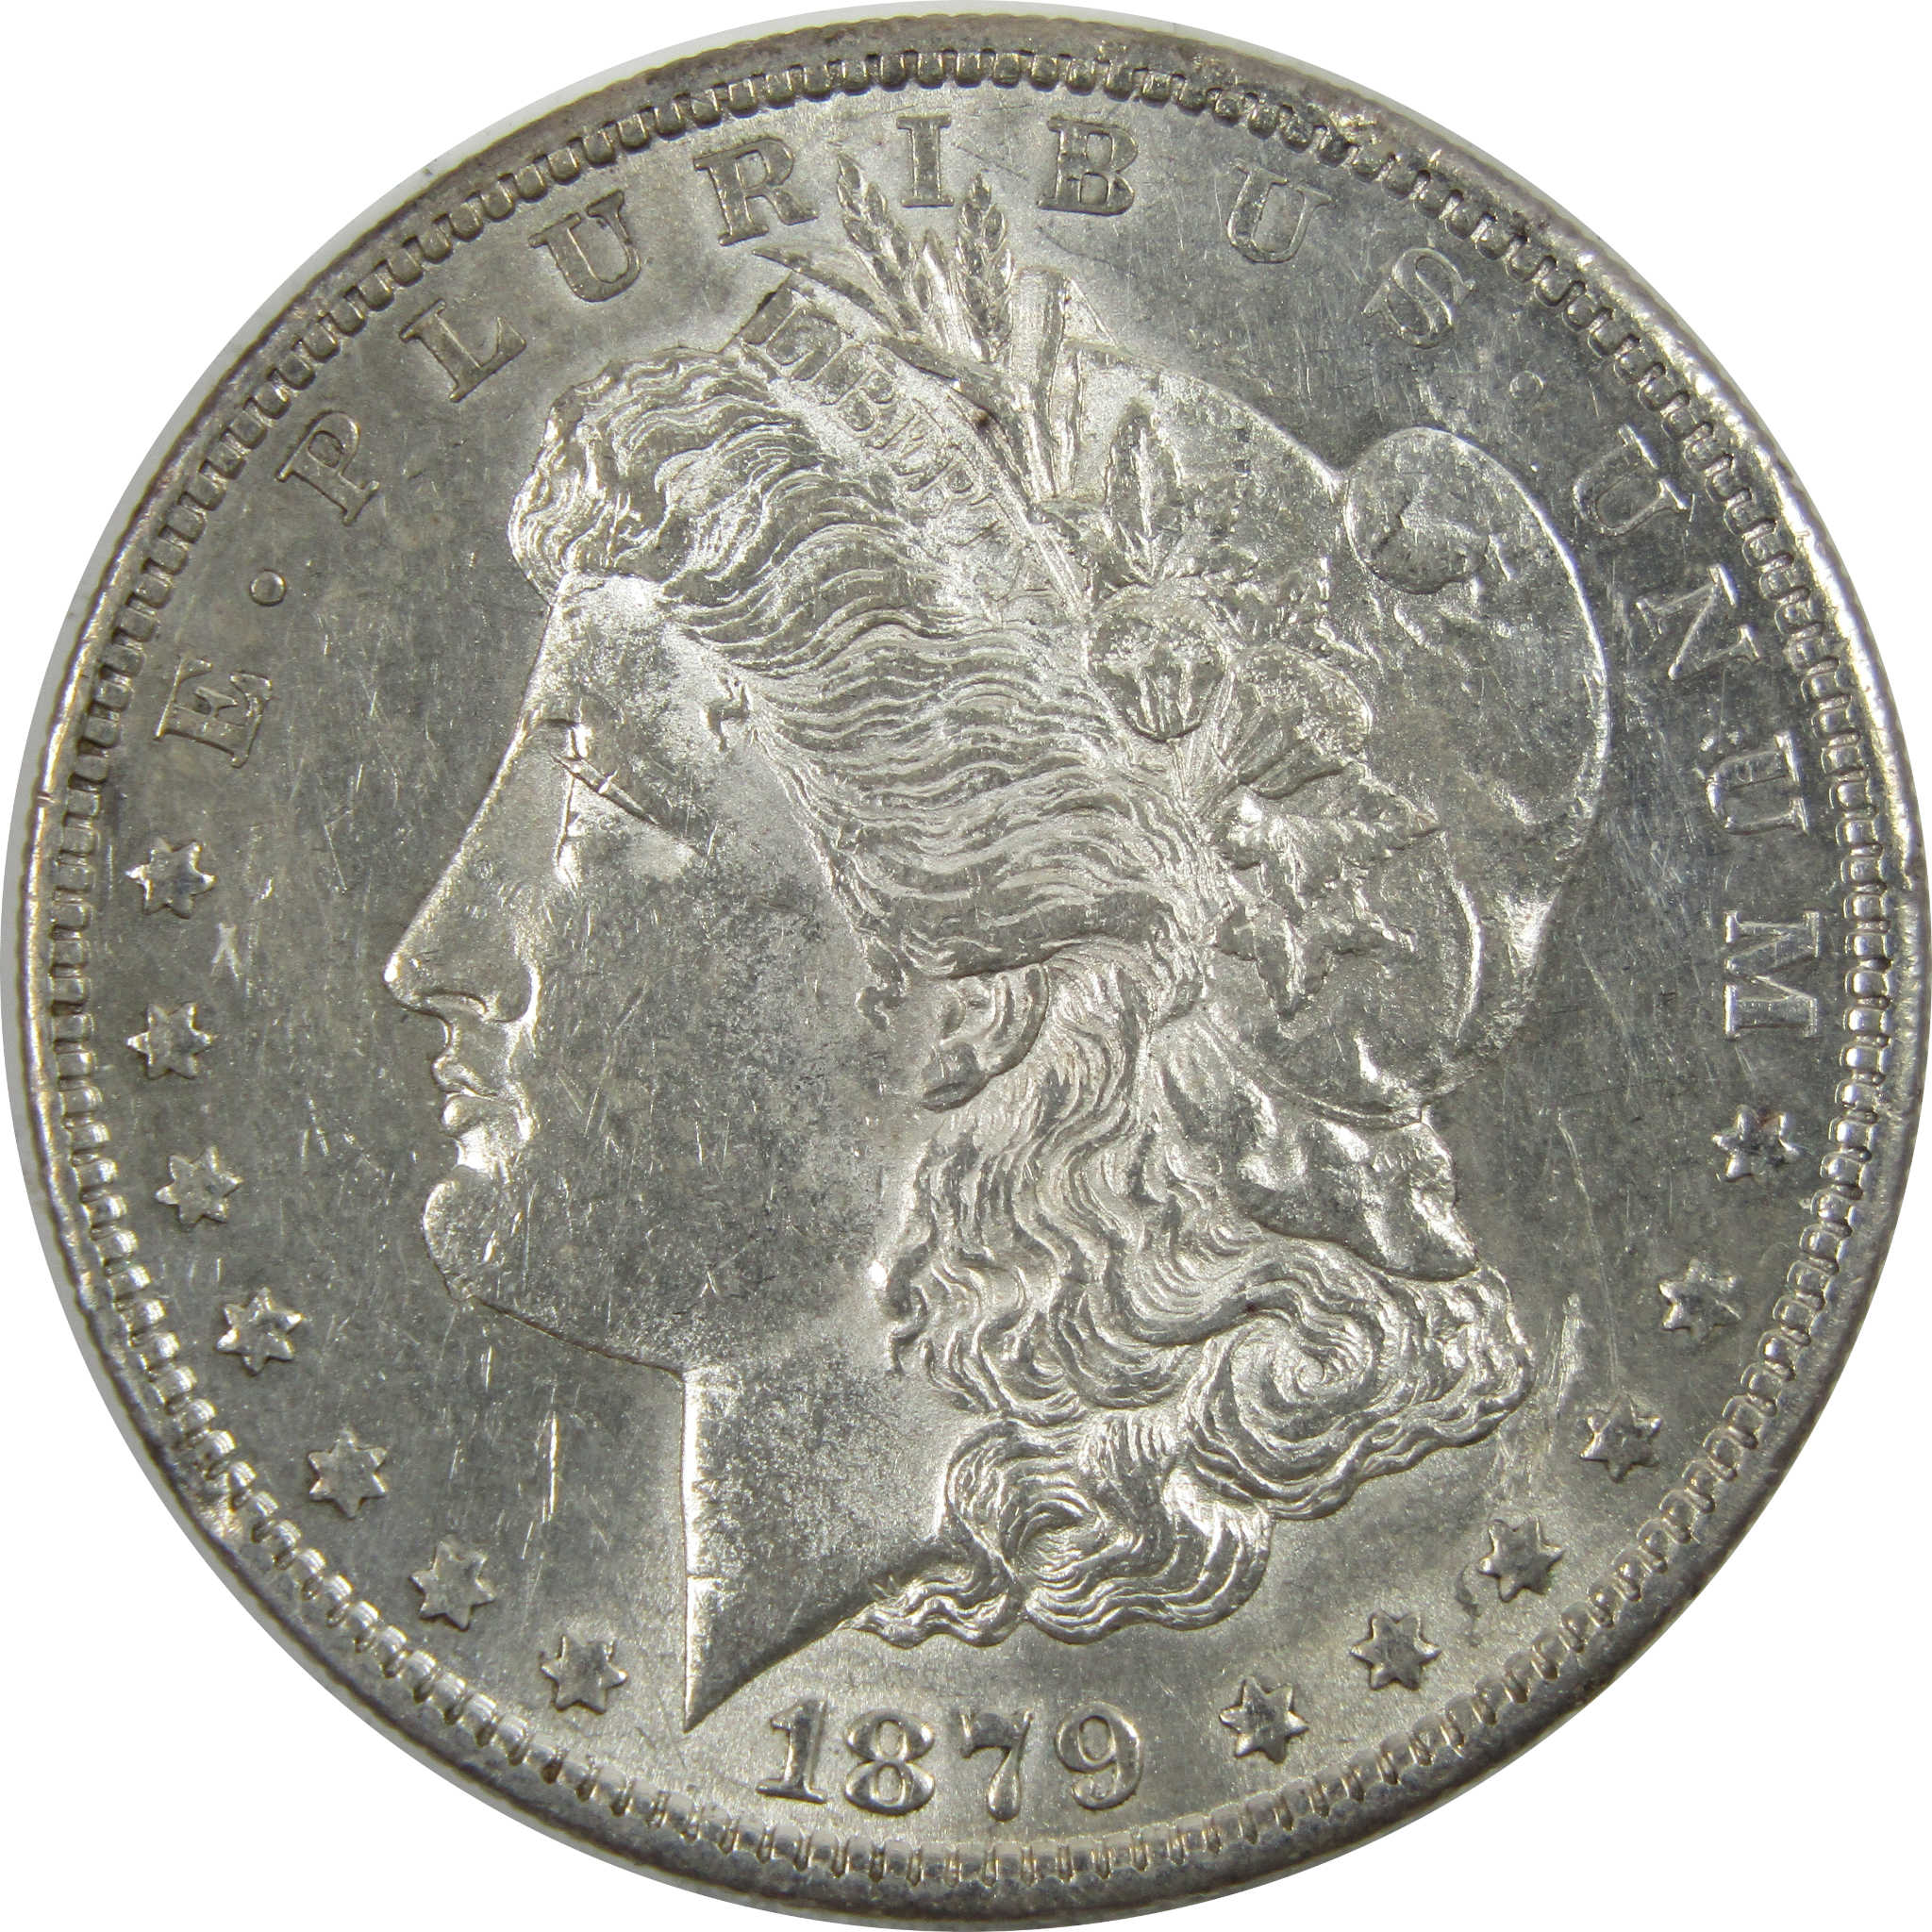 1879 S Morgan Dollar AU About Uncirculated 90% Silver $1 SKU:I5063 - Morgan coin - Morgan silver dollar - Morgan silver dollar for sale - Profile Coins &amp; Collectibles